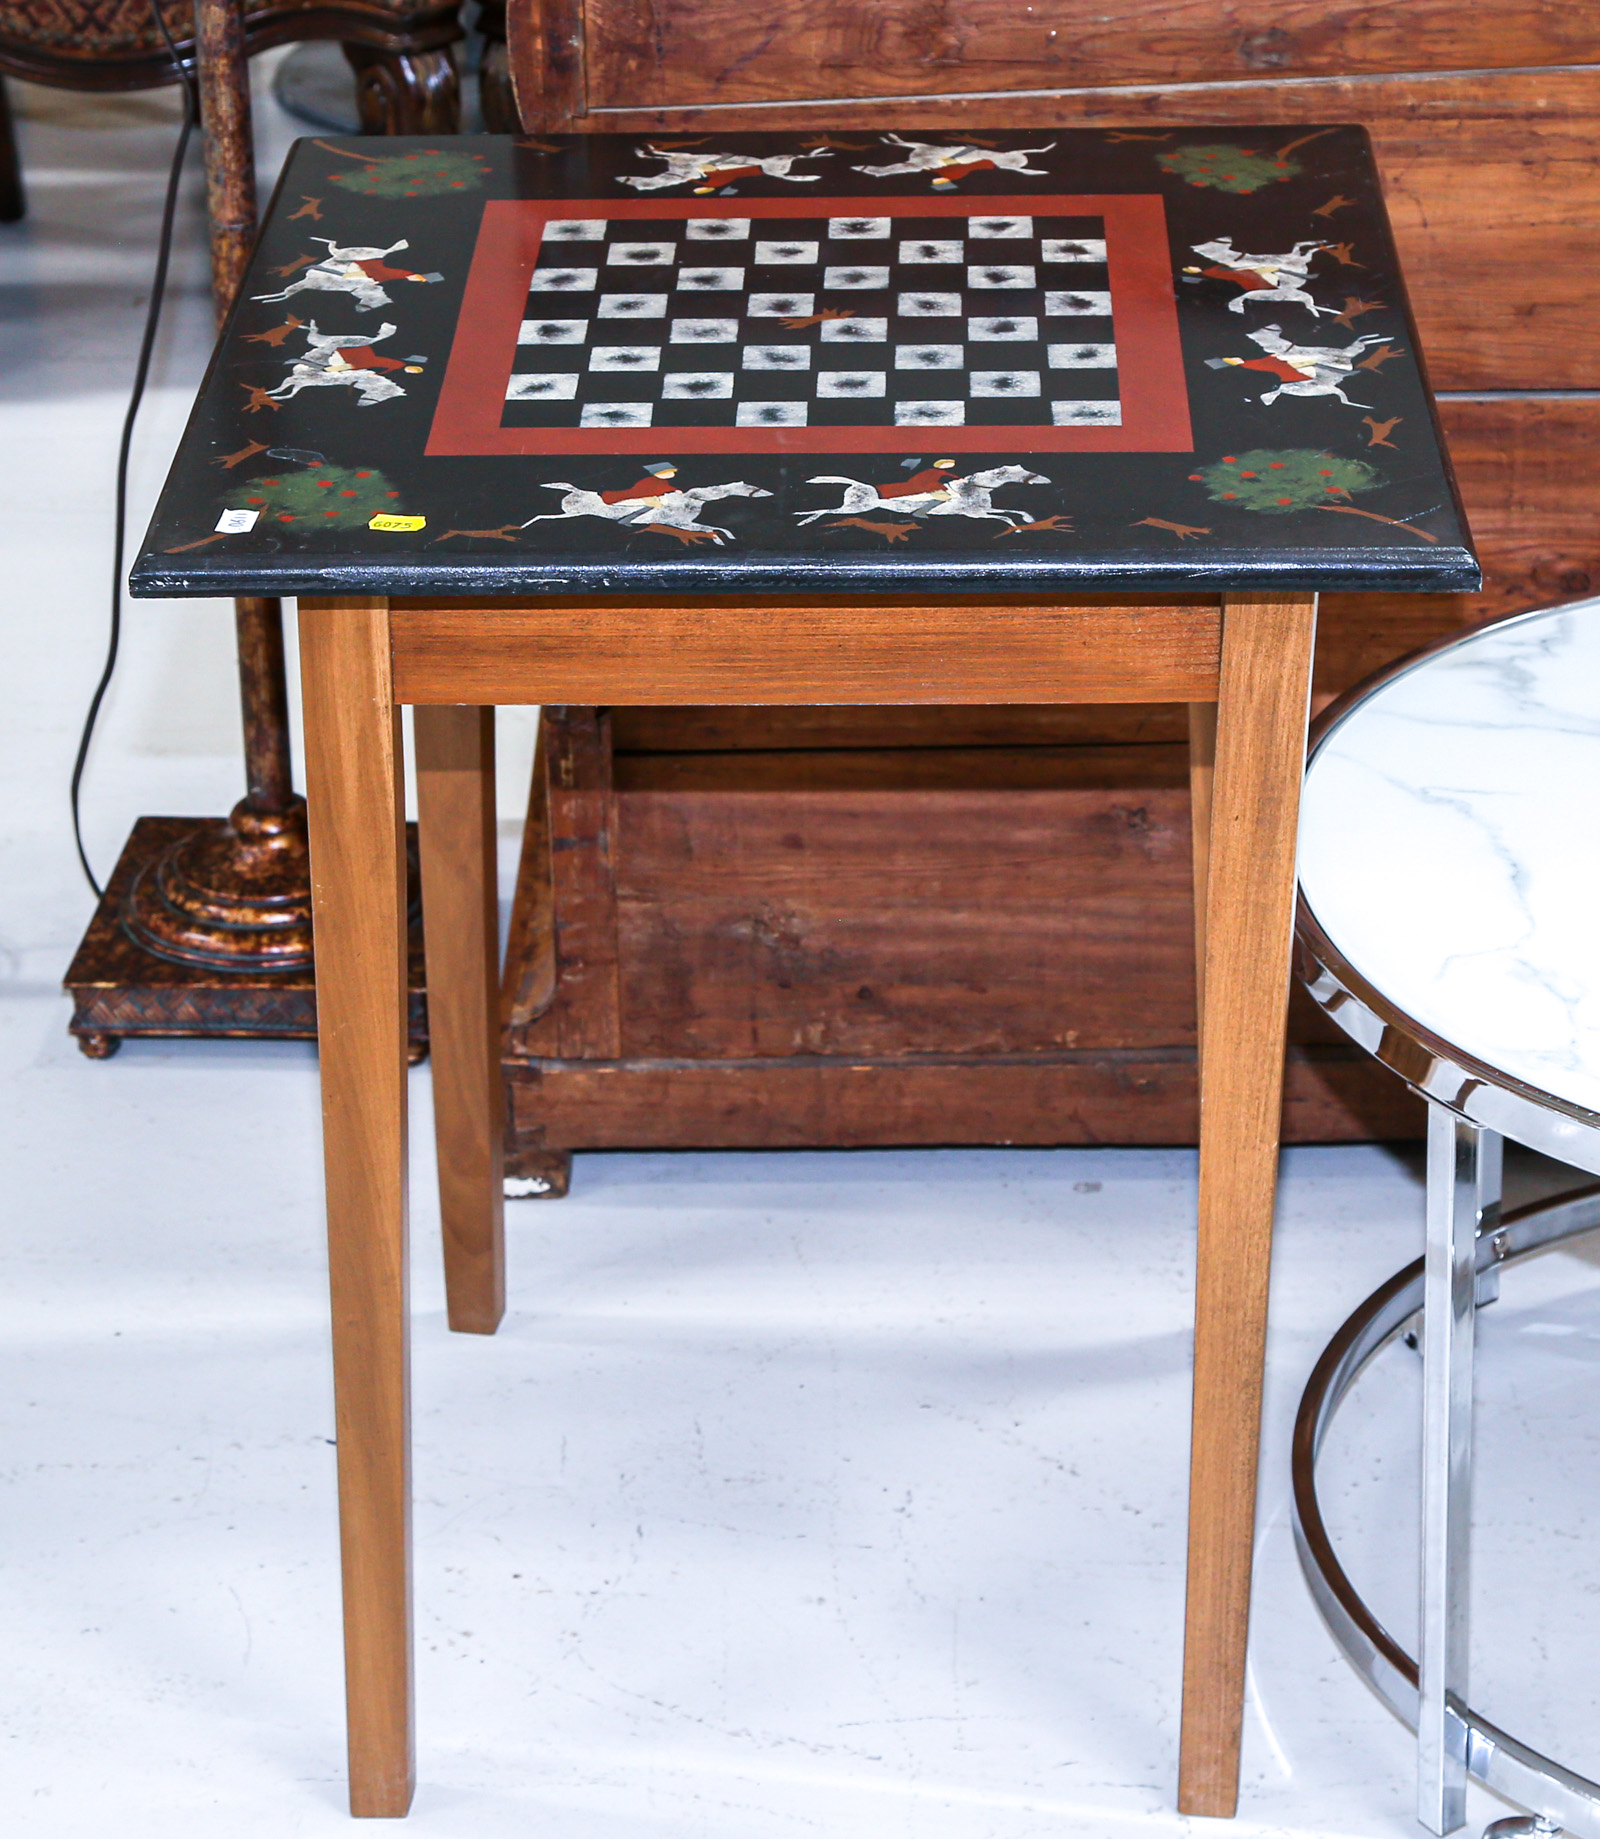 FOX & HOUNDS DECORATED CHESS TABLE Modern;